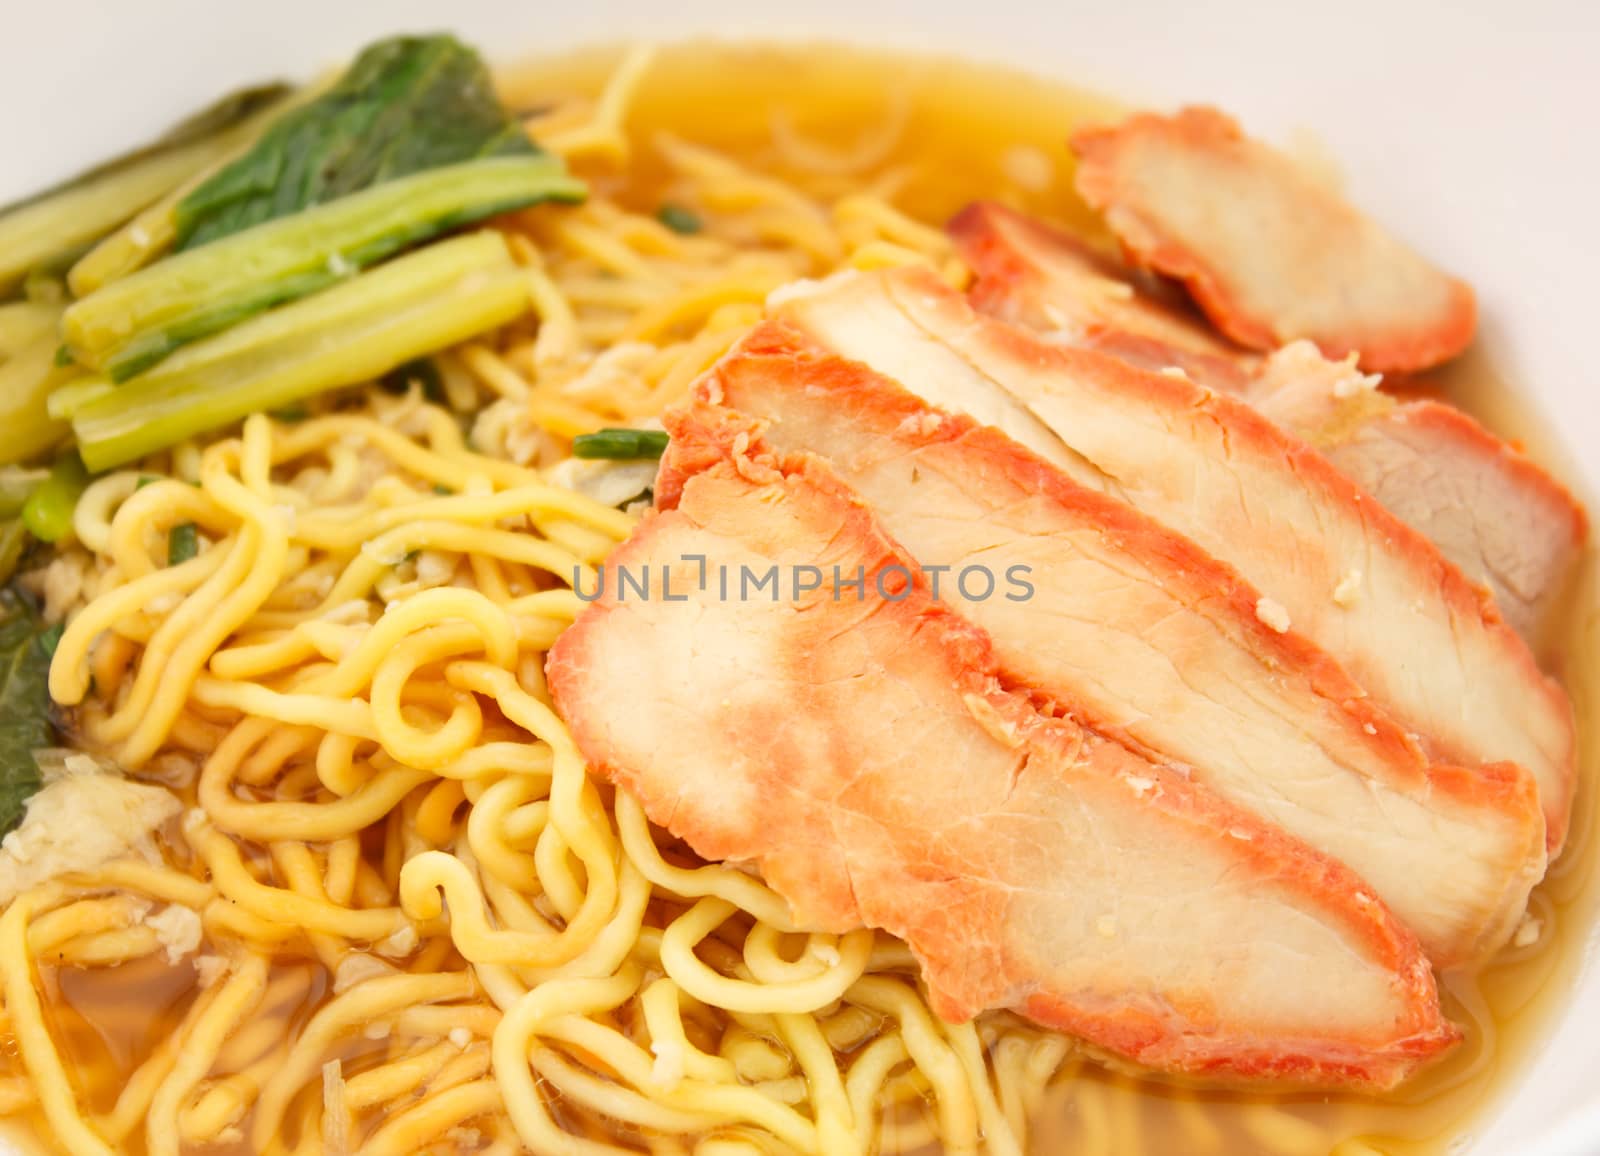 Chinese egg noodles with red pork in soup by vitawin